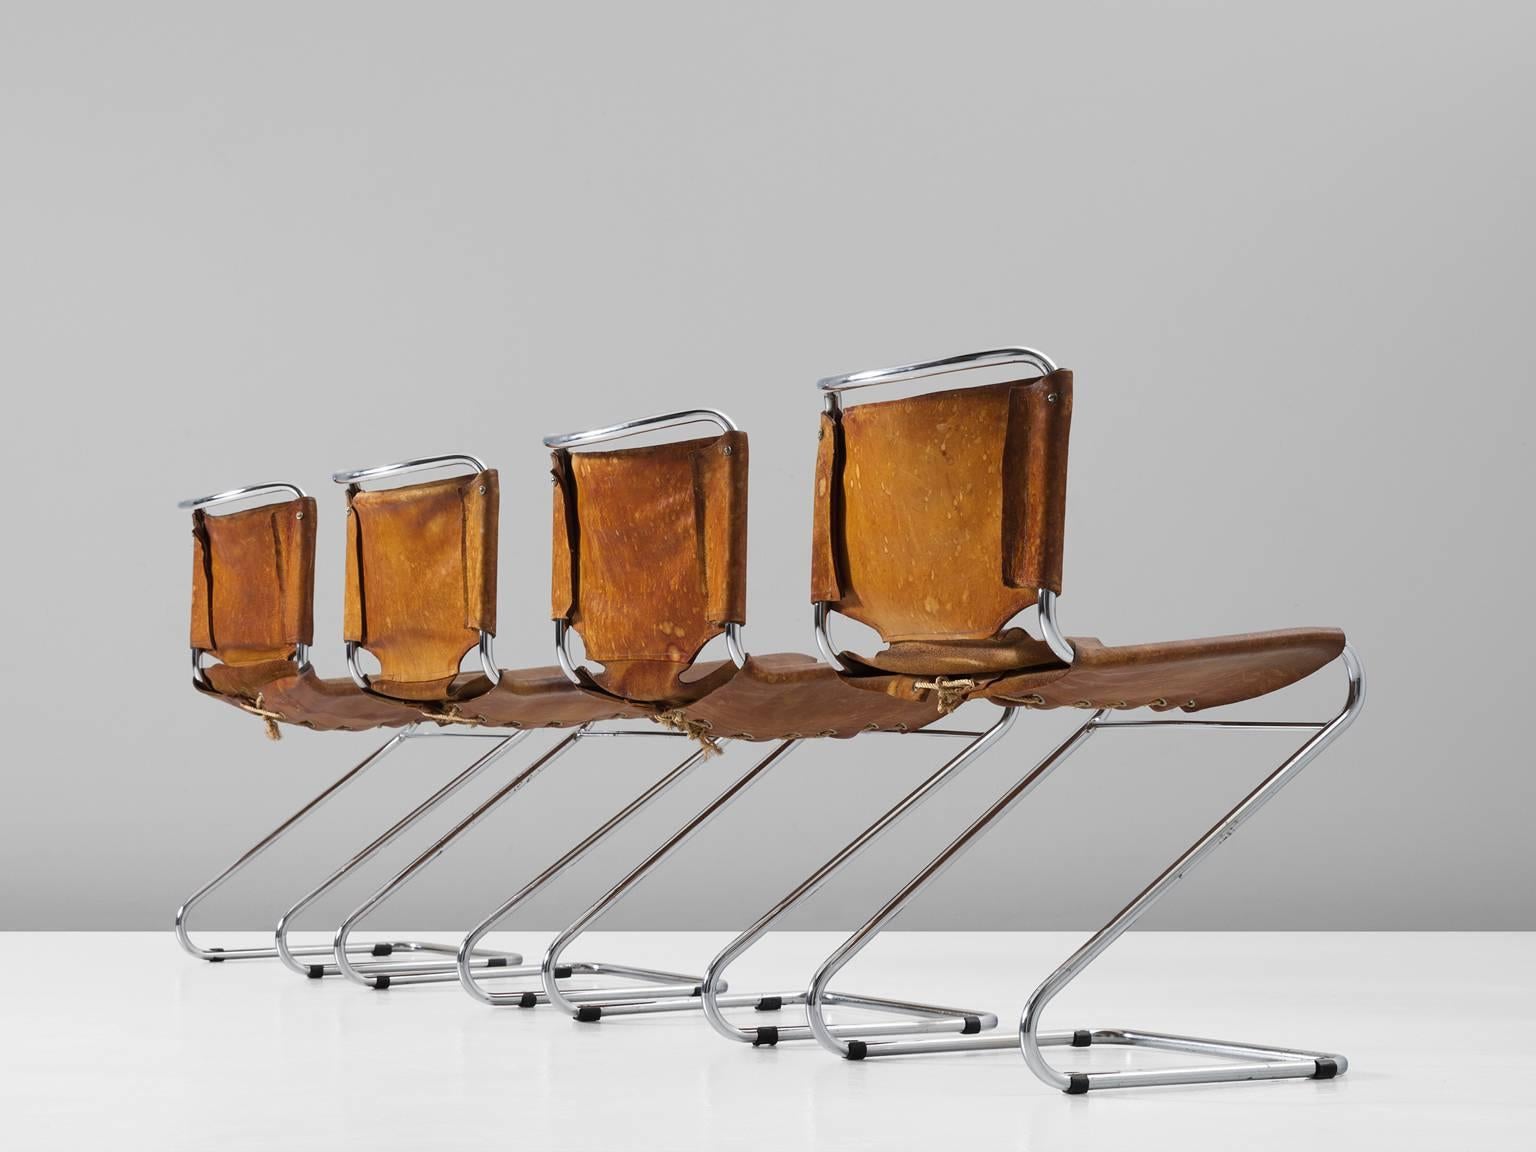 European Set of Four Tubular Dining Chairs with Patinated Cognac Leather Upholstery